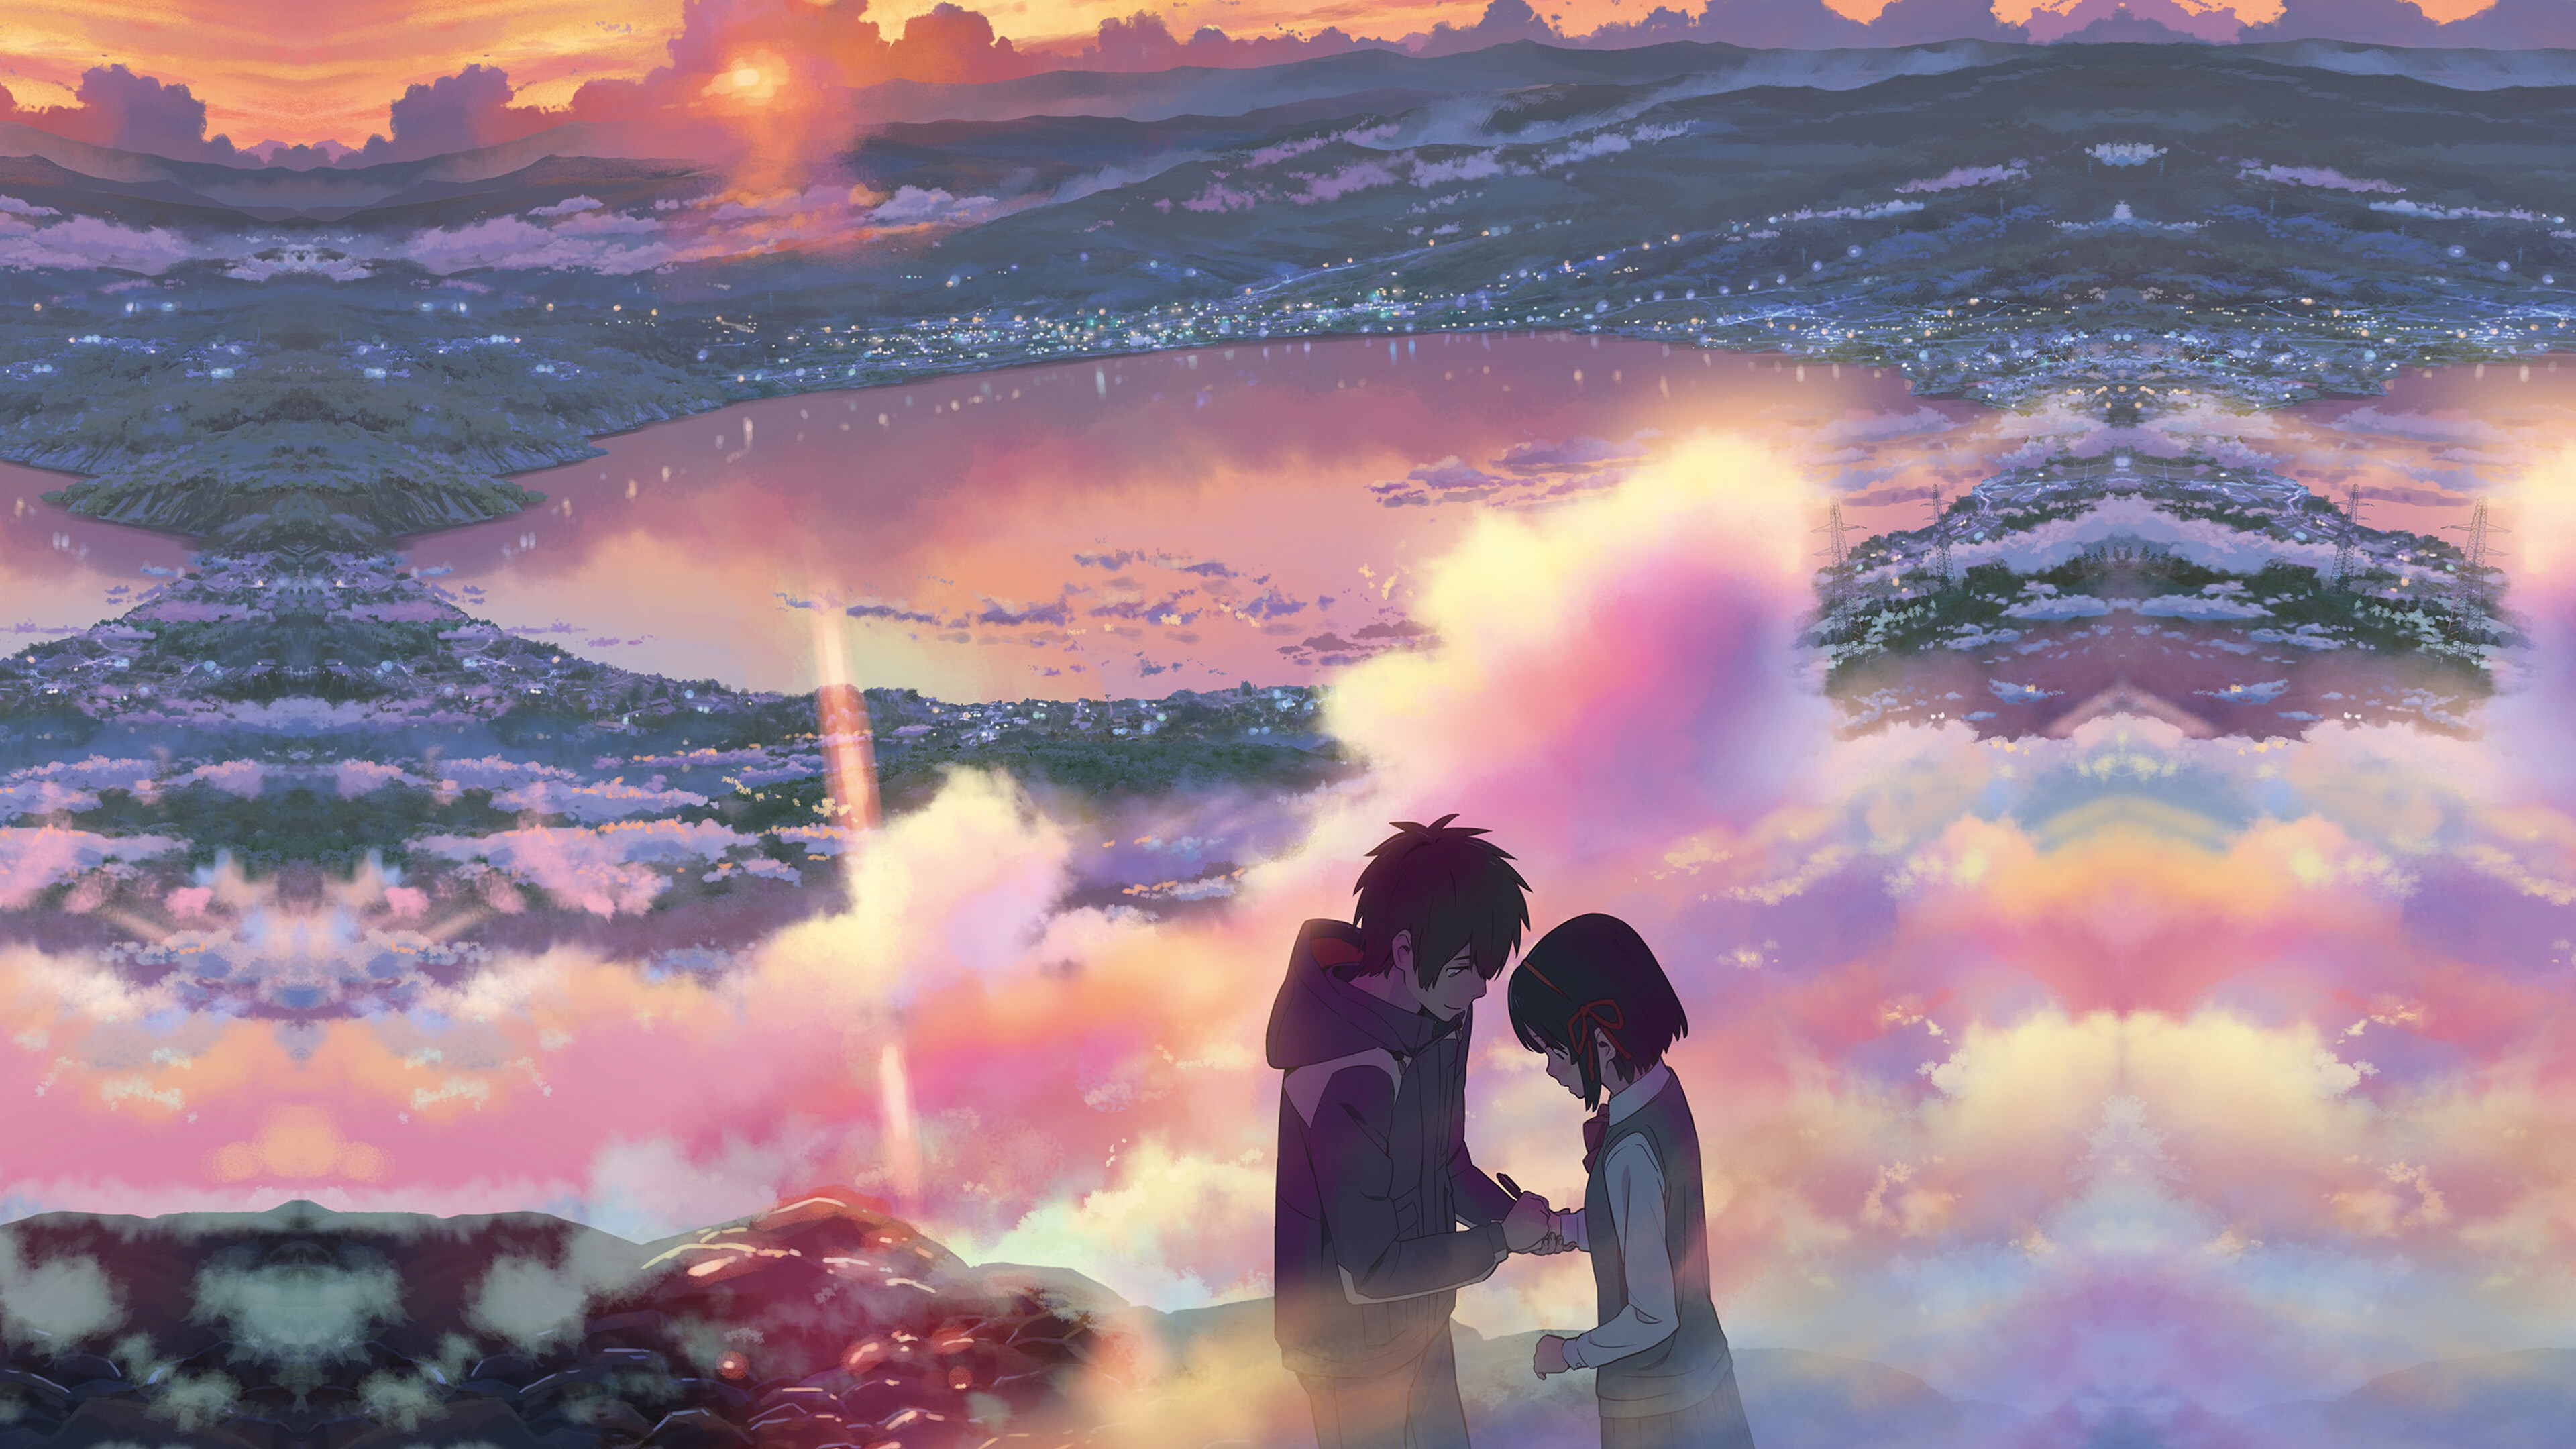 Your Name: Orchestral score and soundtrack composed by Radwimps, Anime. 3840x2160 4K Wallpaper.